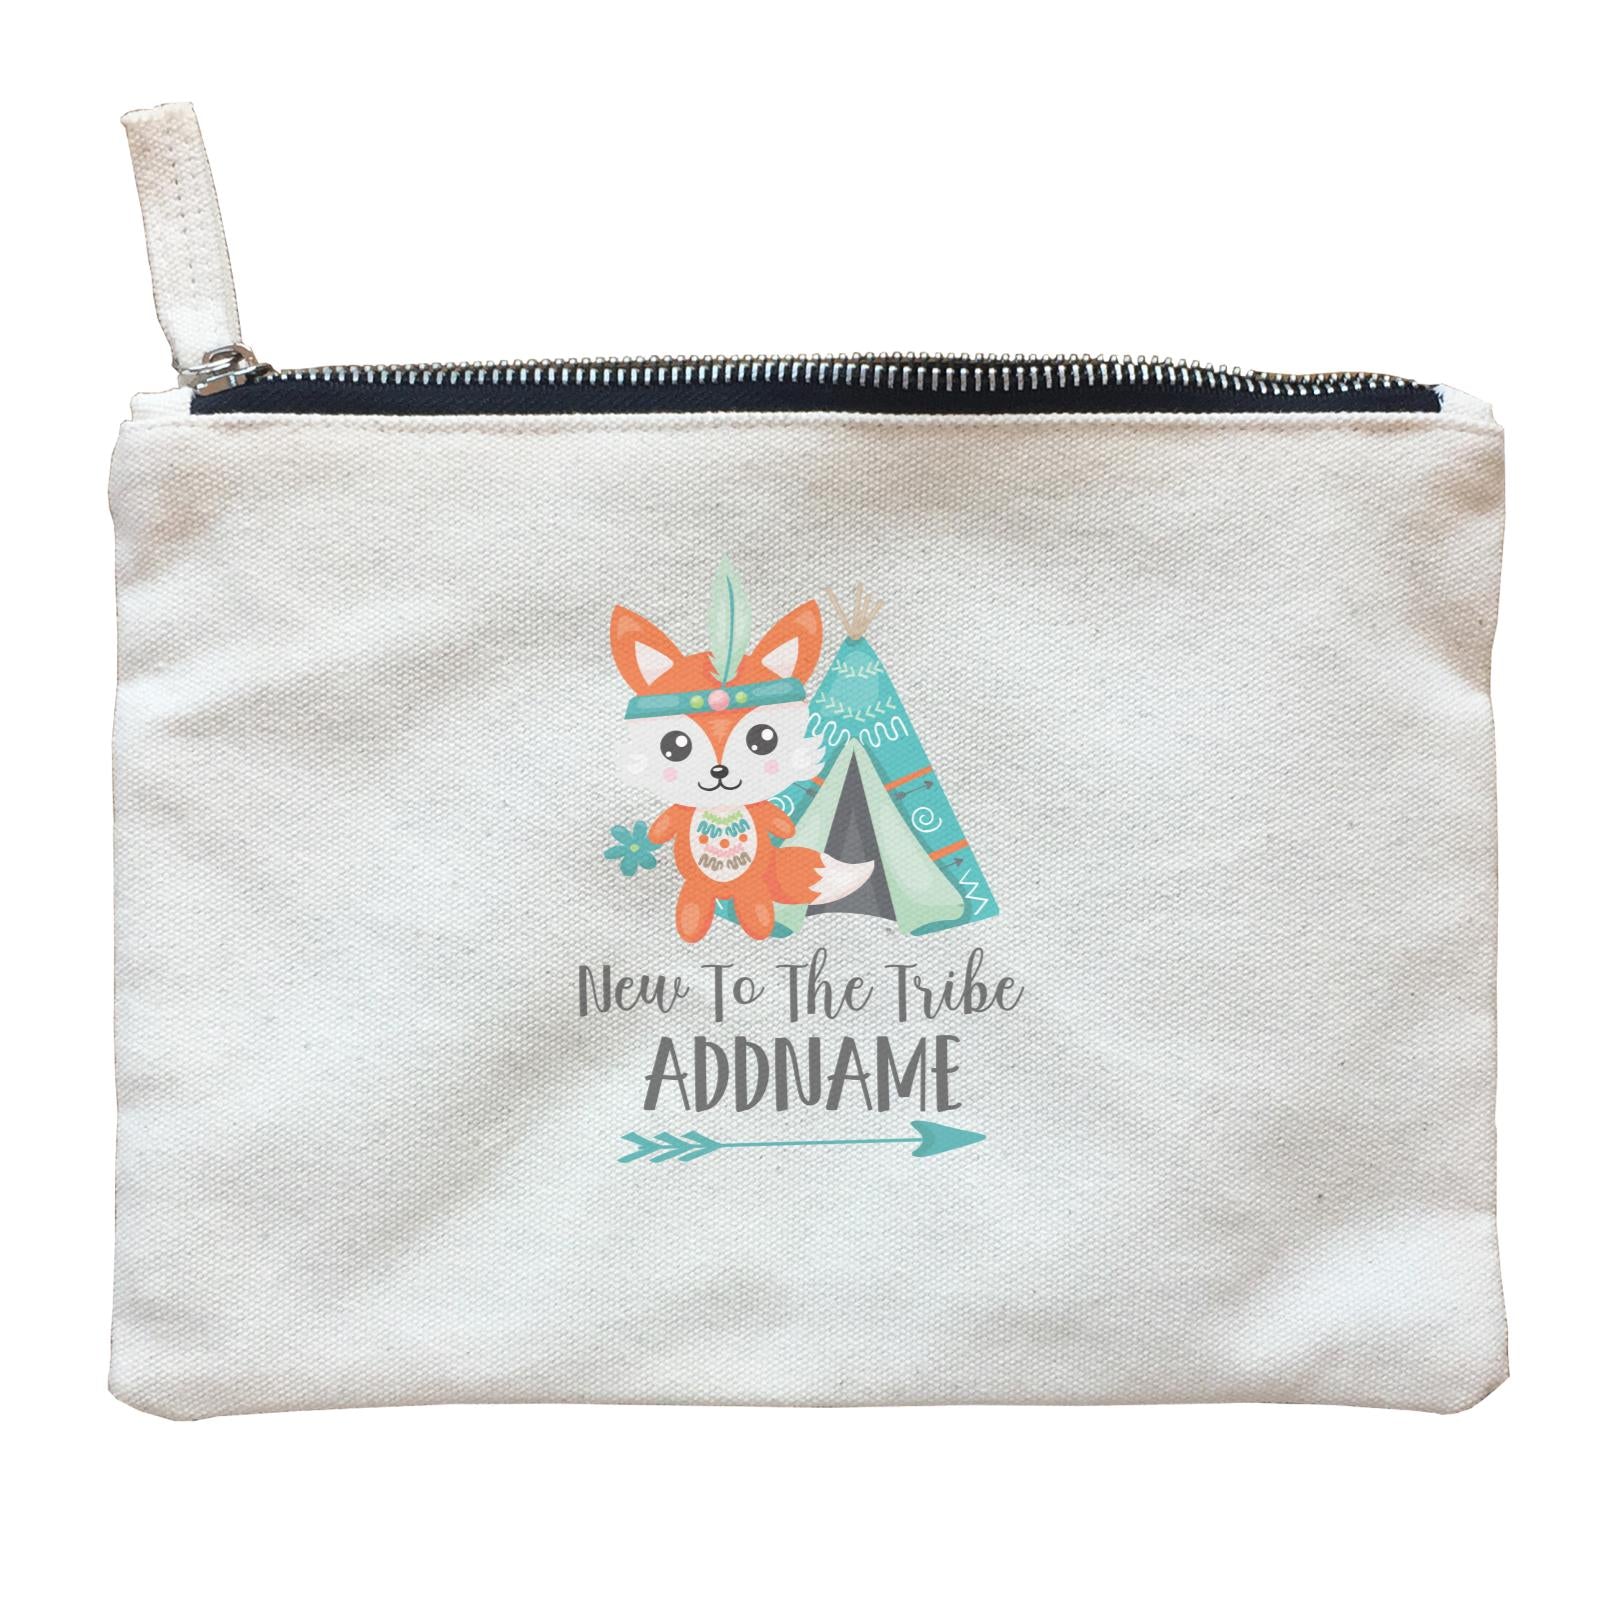 Cute Tribe Animals Fox New To The Tribe Addname Zipper Pouch